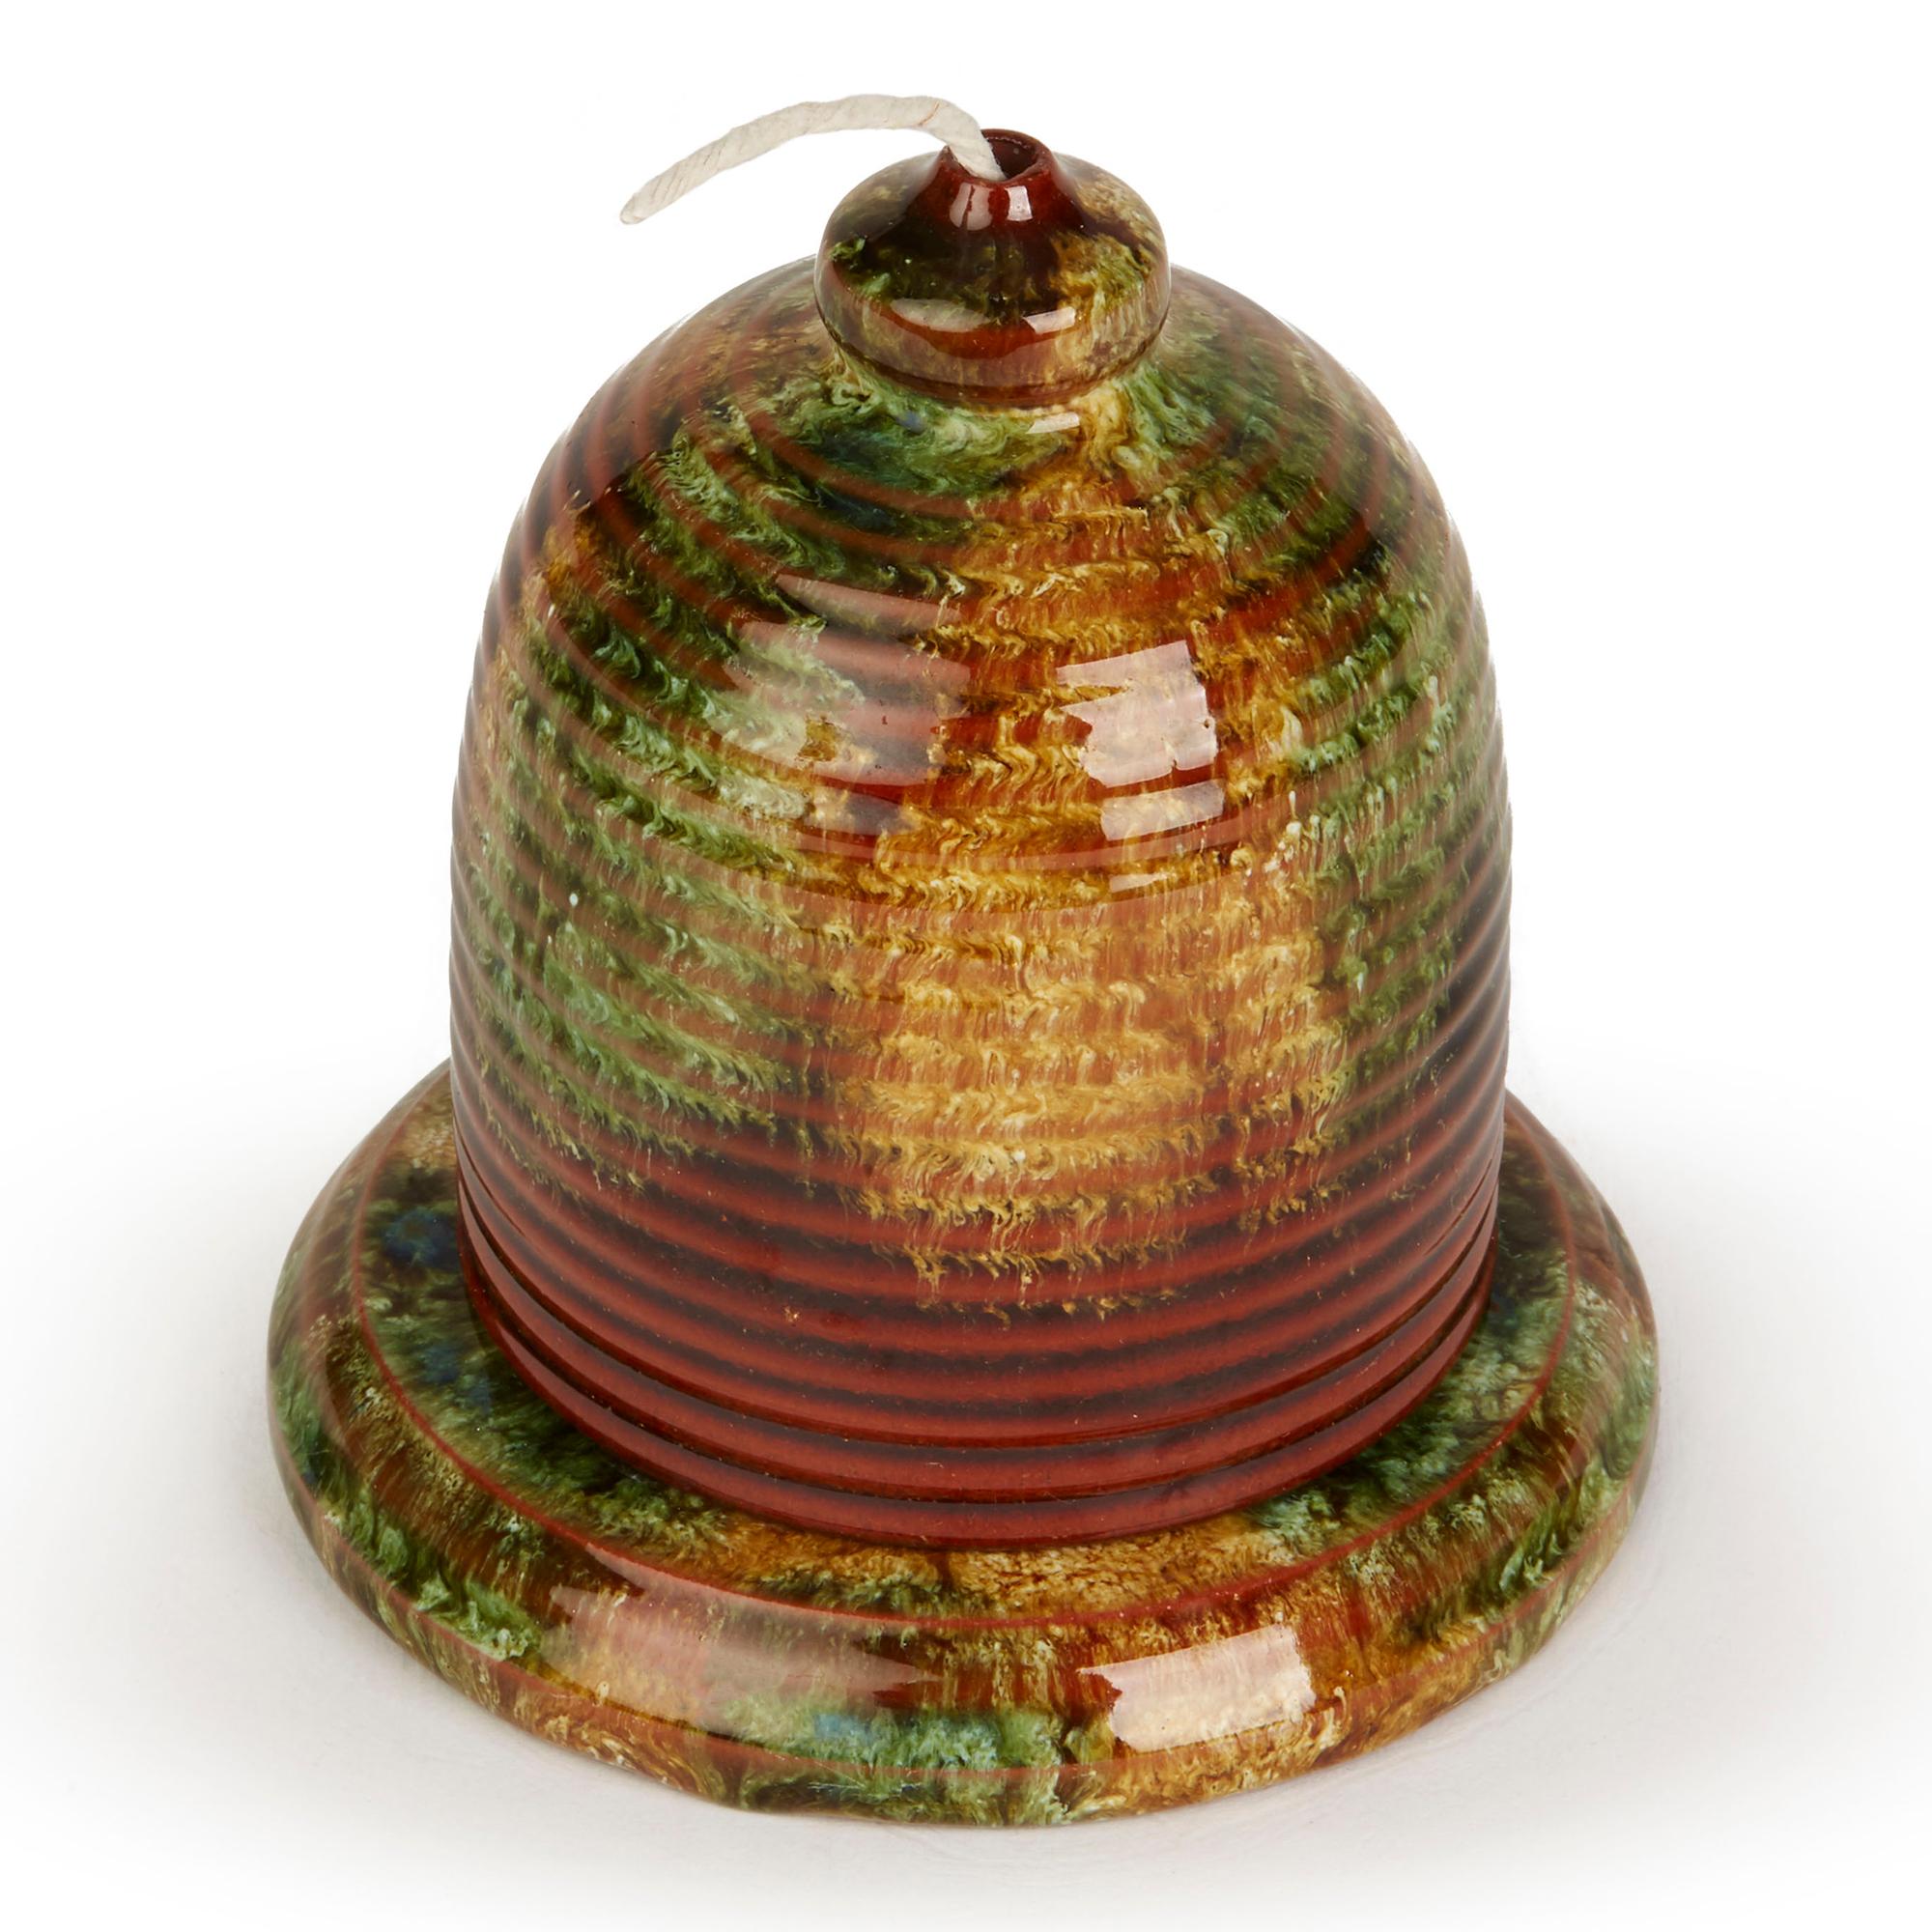 A rare Art Nouveau Torquay Terracotta Co, Stapleton glazed pottery string dispenser of beehive shape on a rounded pedestal base with a raised string compartment to the inside dating from around 1900. The dispenser is decorated in streaked, green,